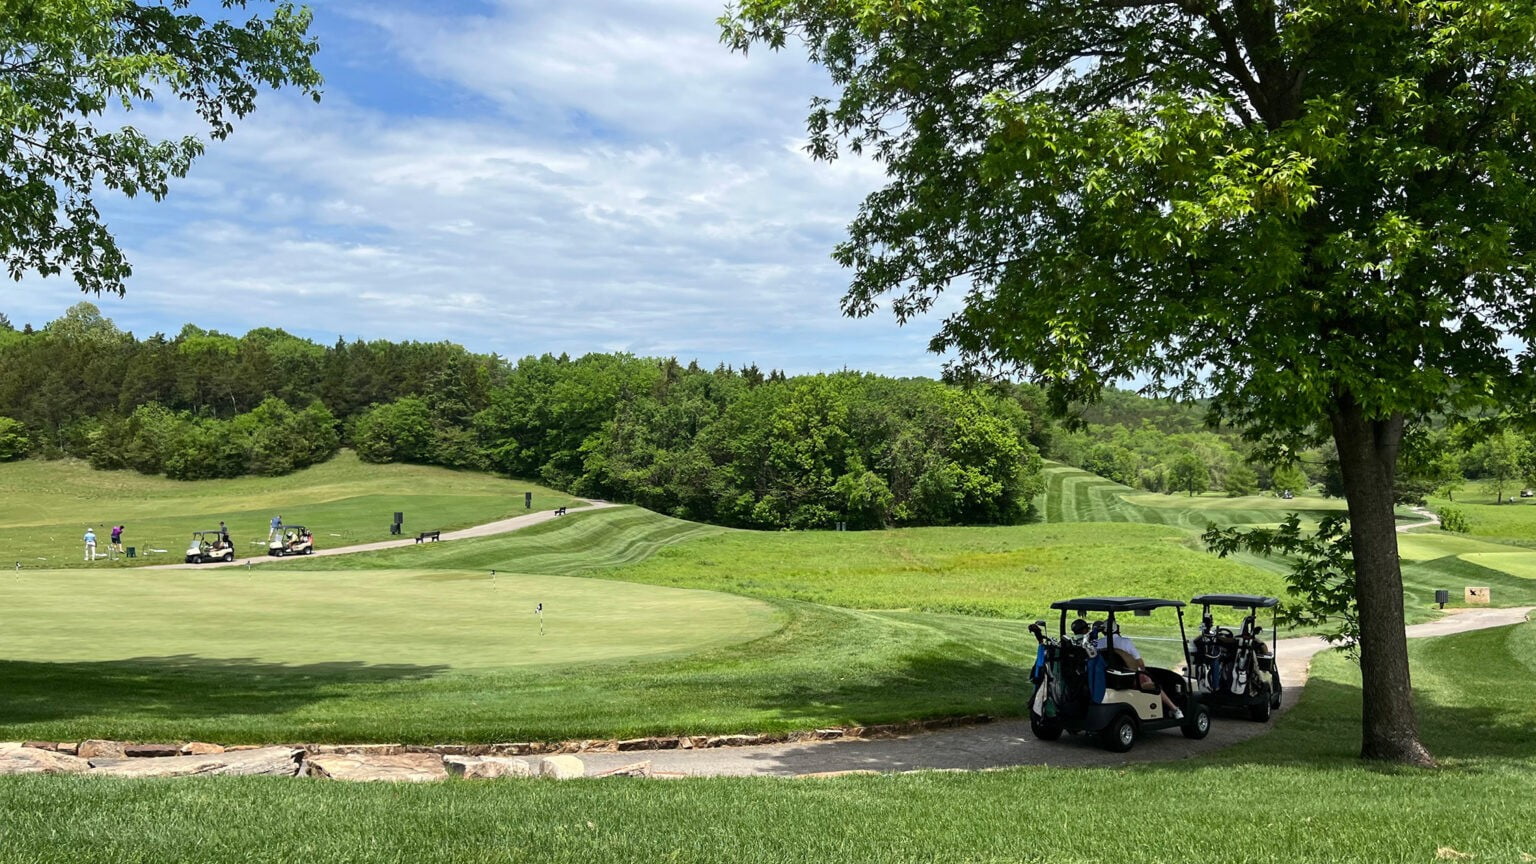 Get into the swing of things at the beautiful golf courses of Lake of the Ozarks